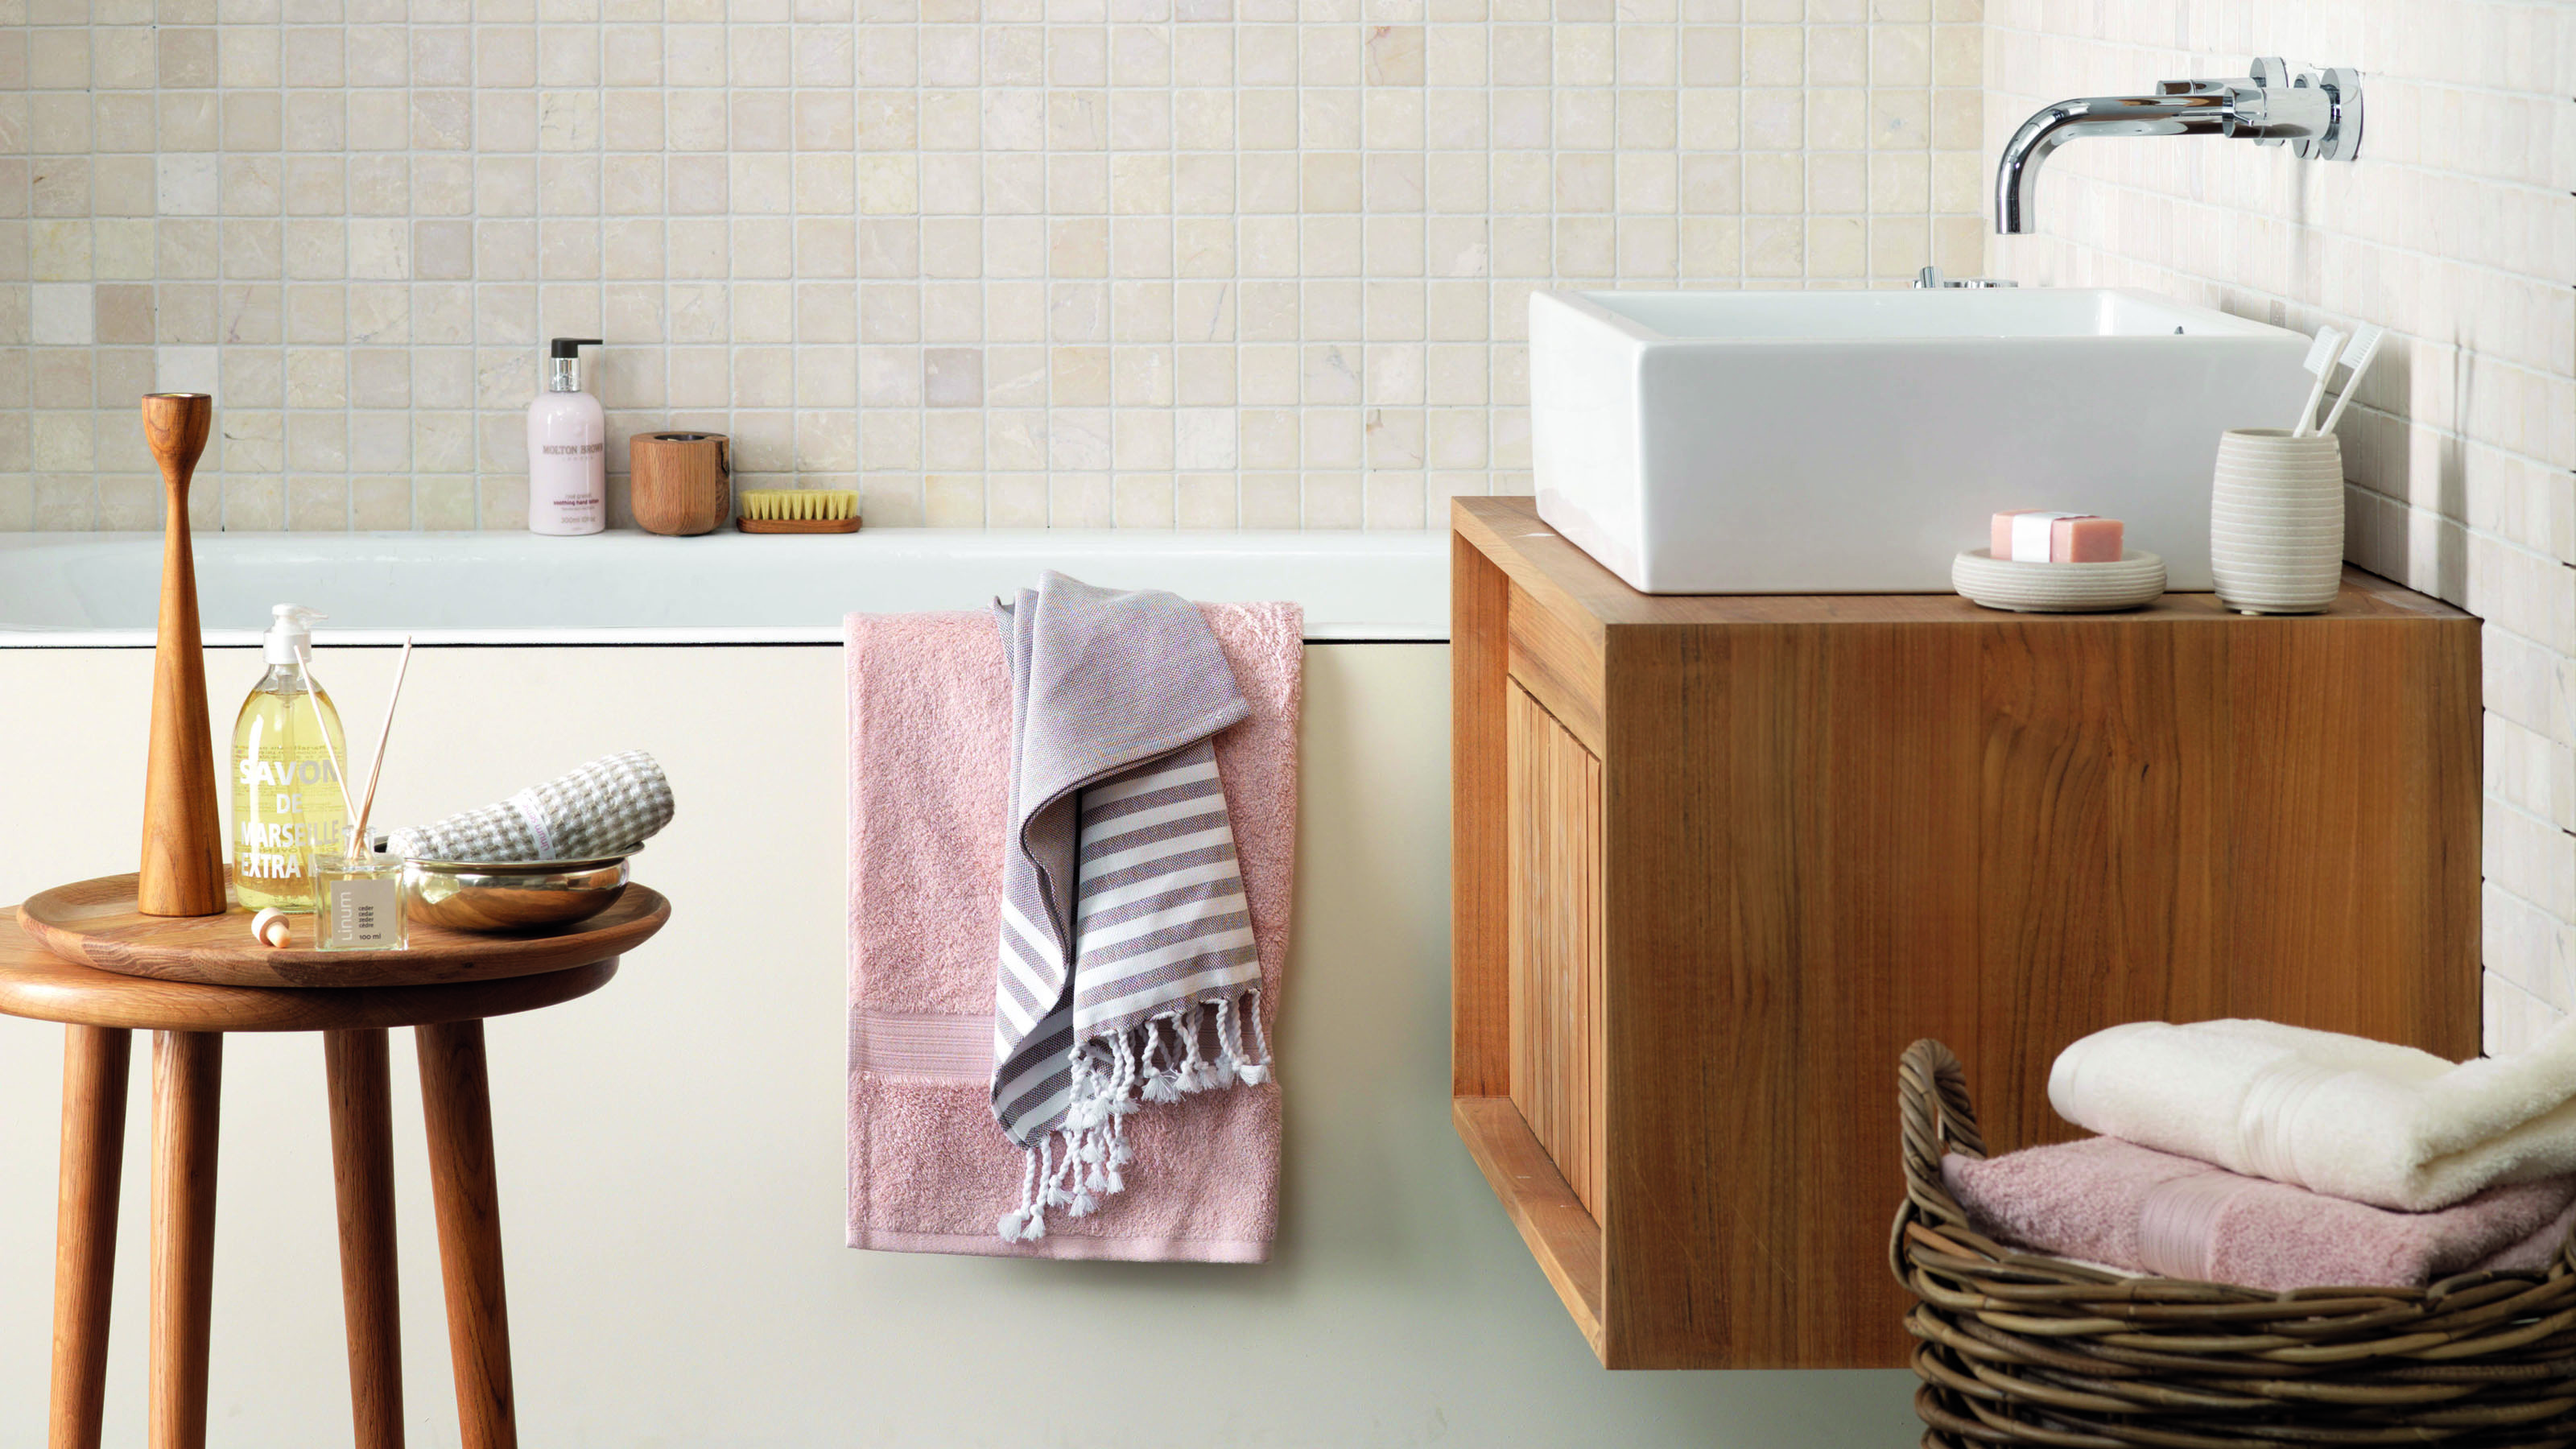 Small bathroom storage ideas: 15 tips to clear the clutter